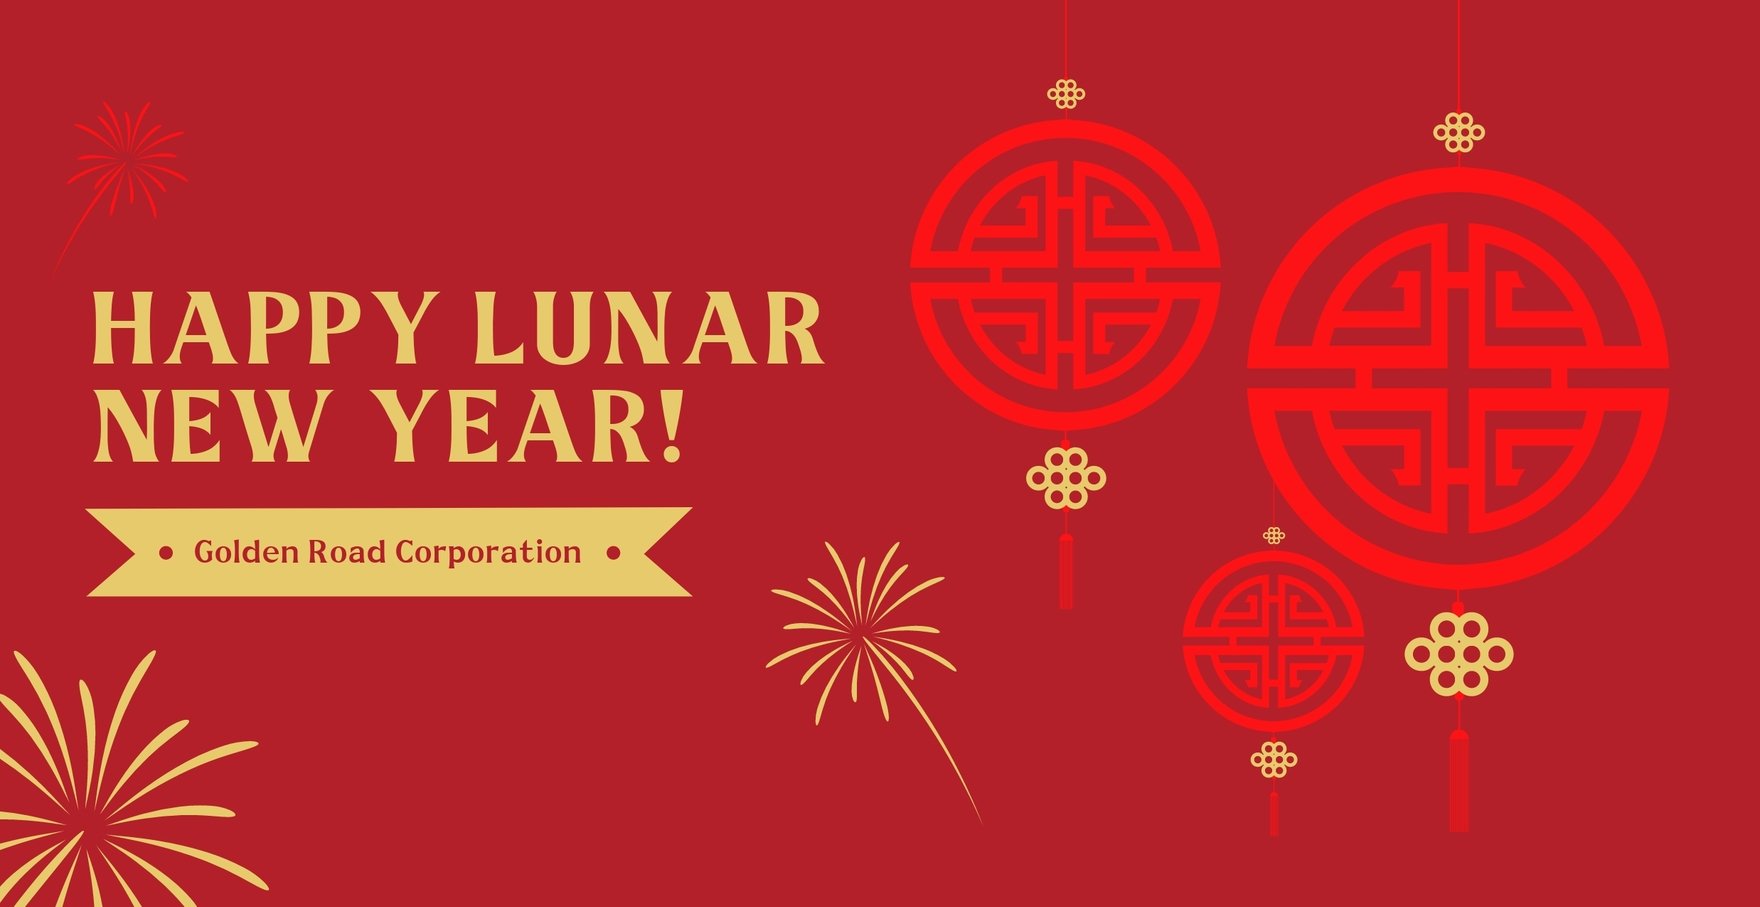 free-business-lunar-new-year-card-download-in-png-jpg-template